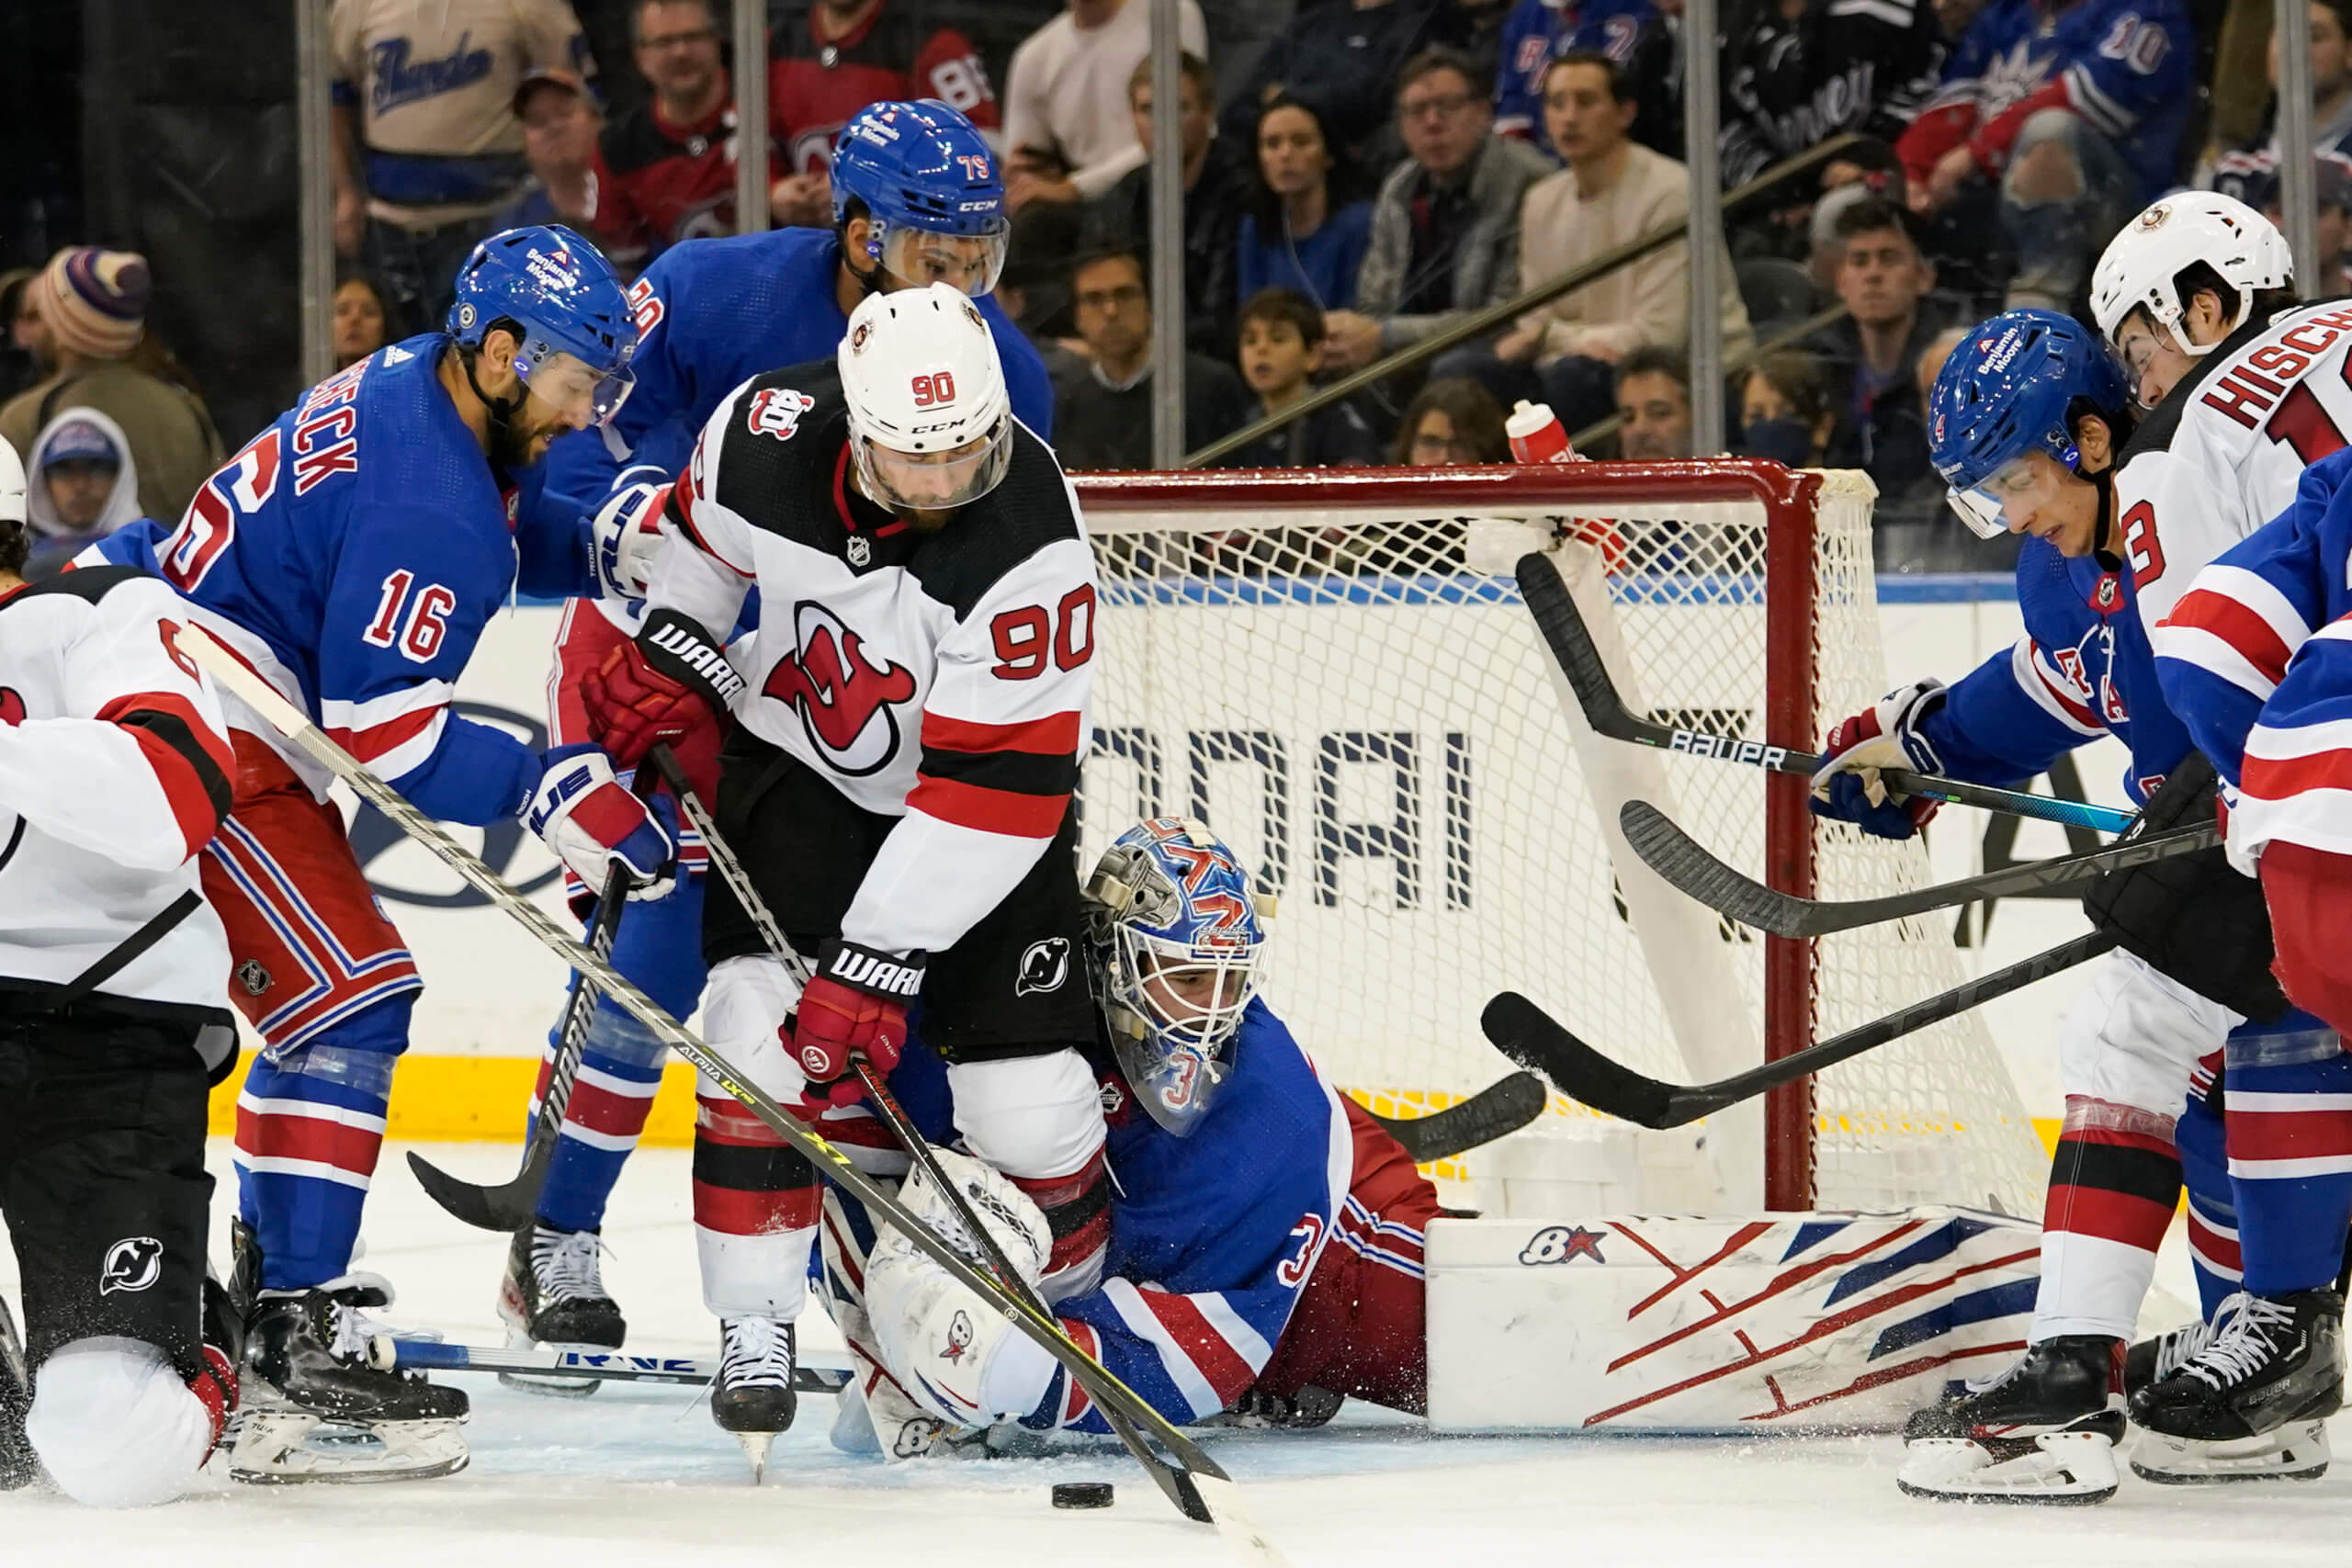 Devils beat Rangers 3 - 2 to advance to Cup finals